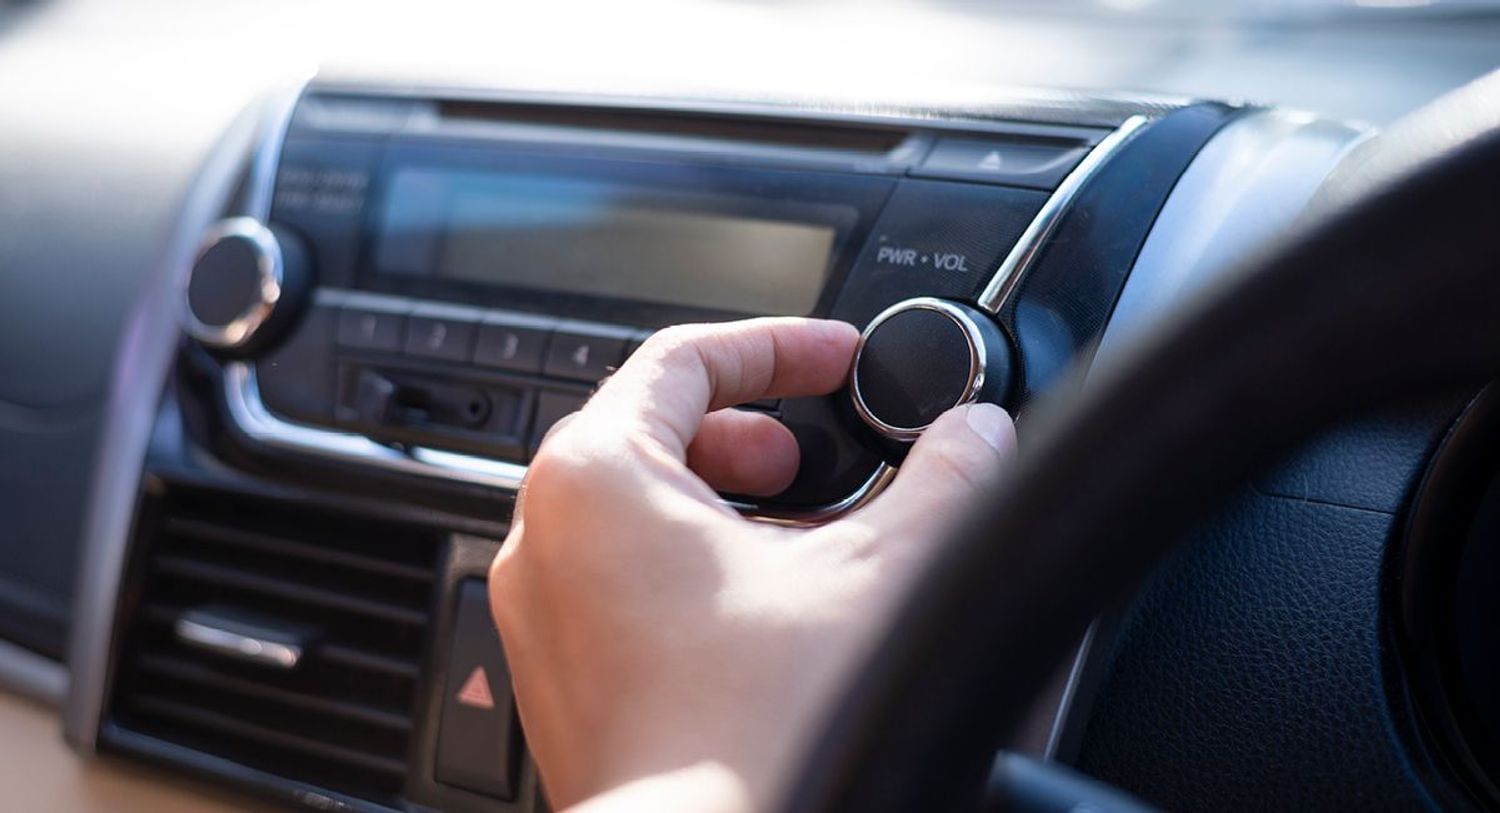 Fingers adjusting the dial on a car radio